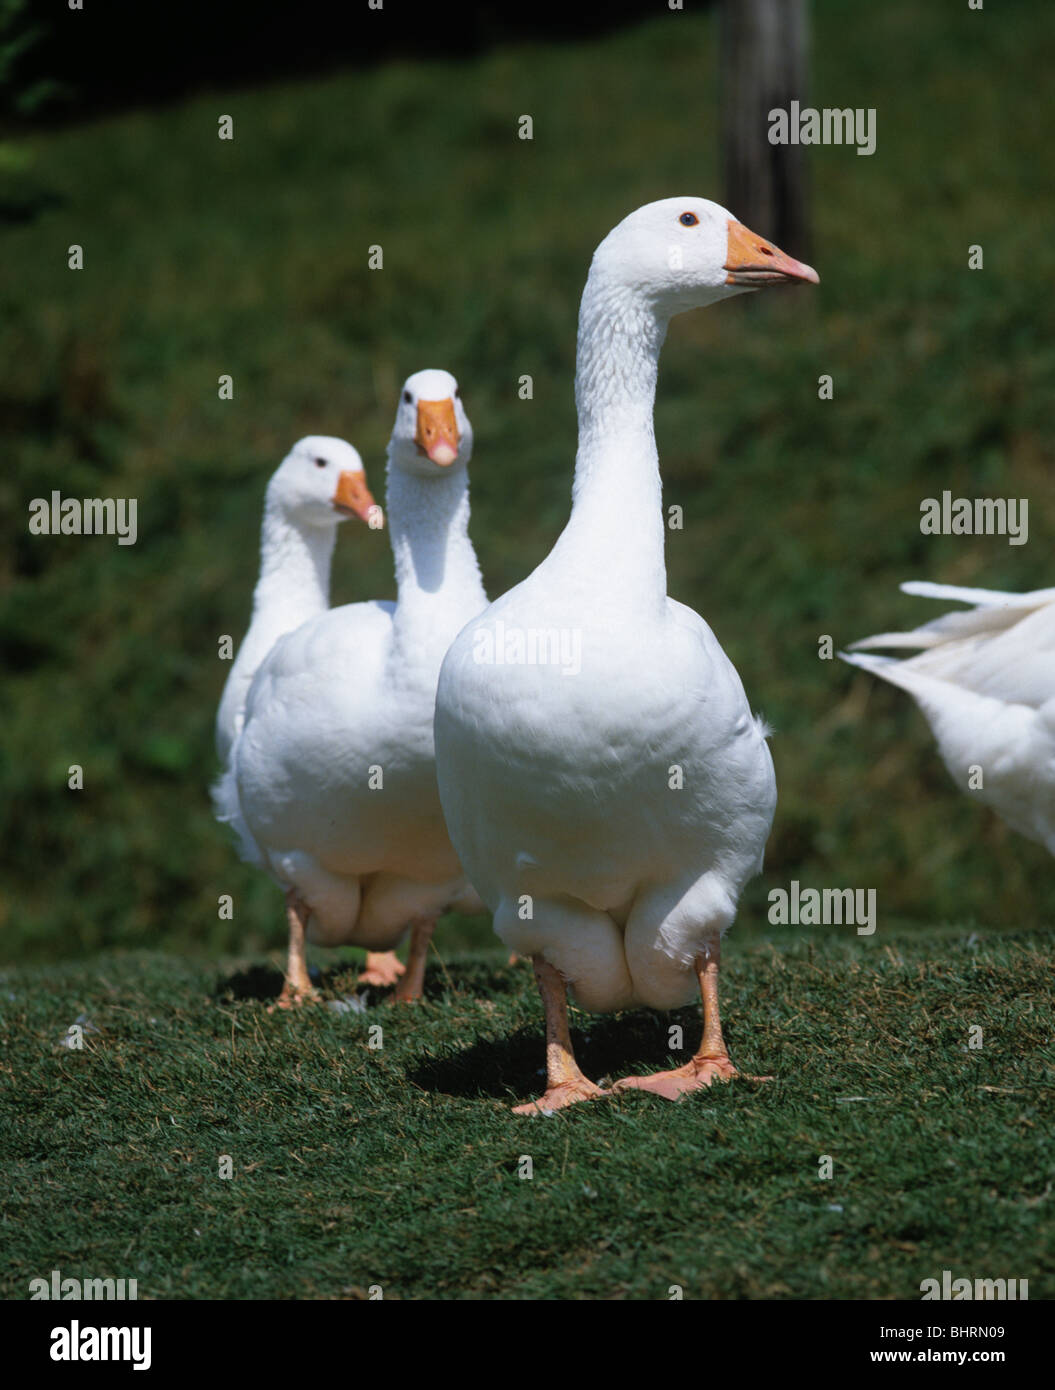 Farmed white goose standing on grass with two others behind Stock Photo